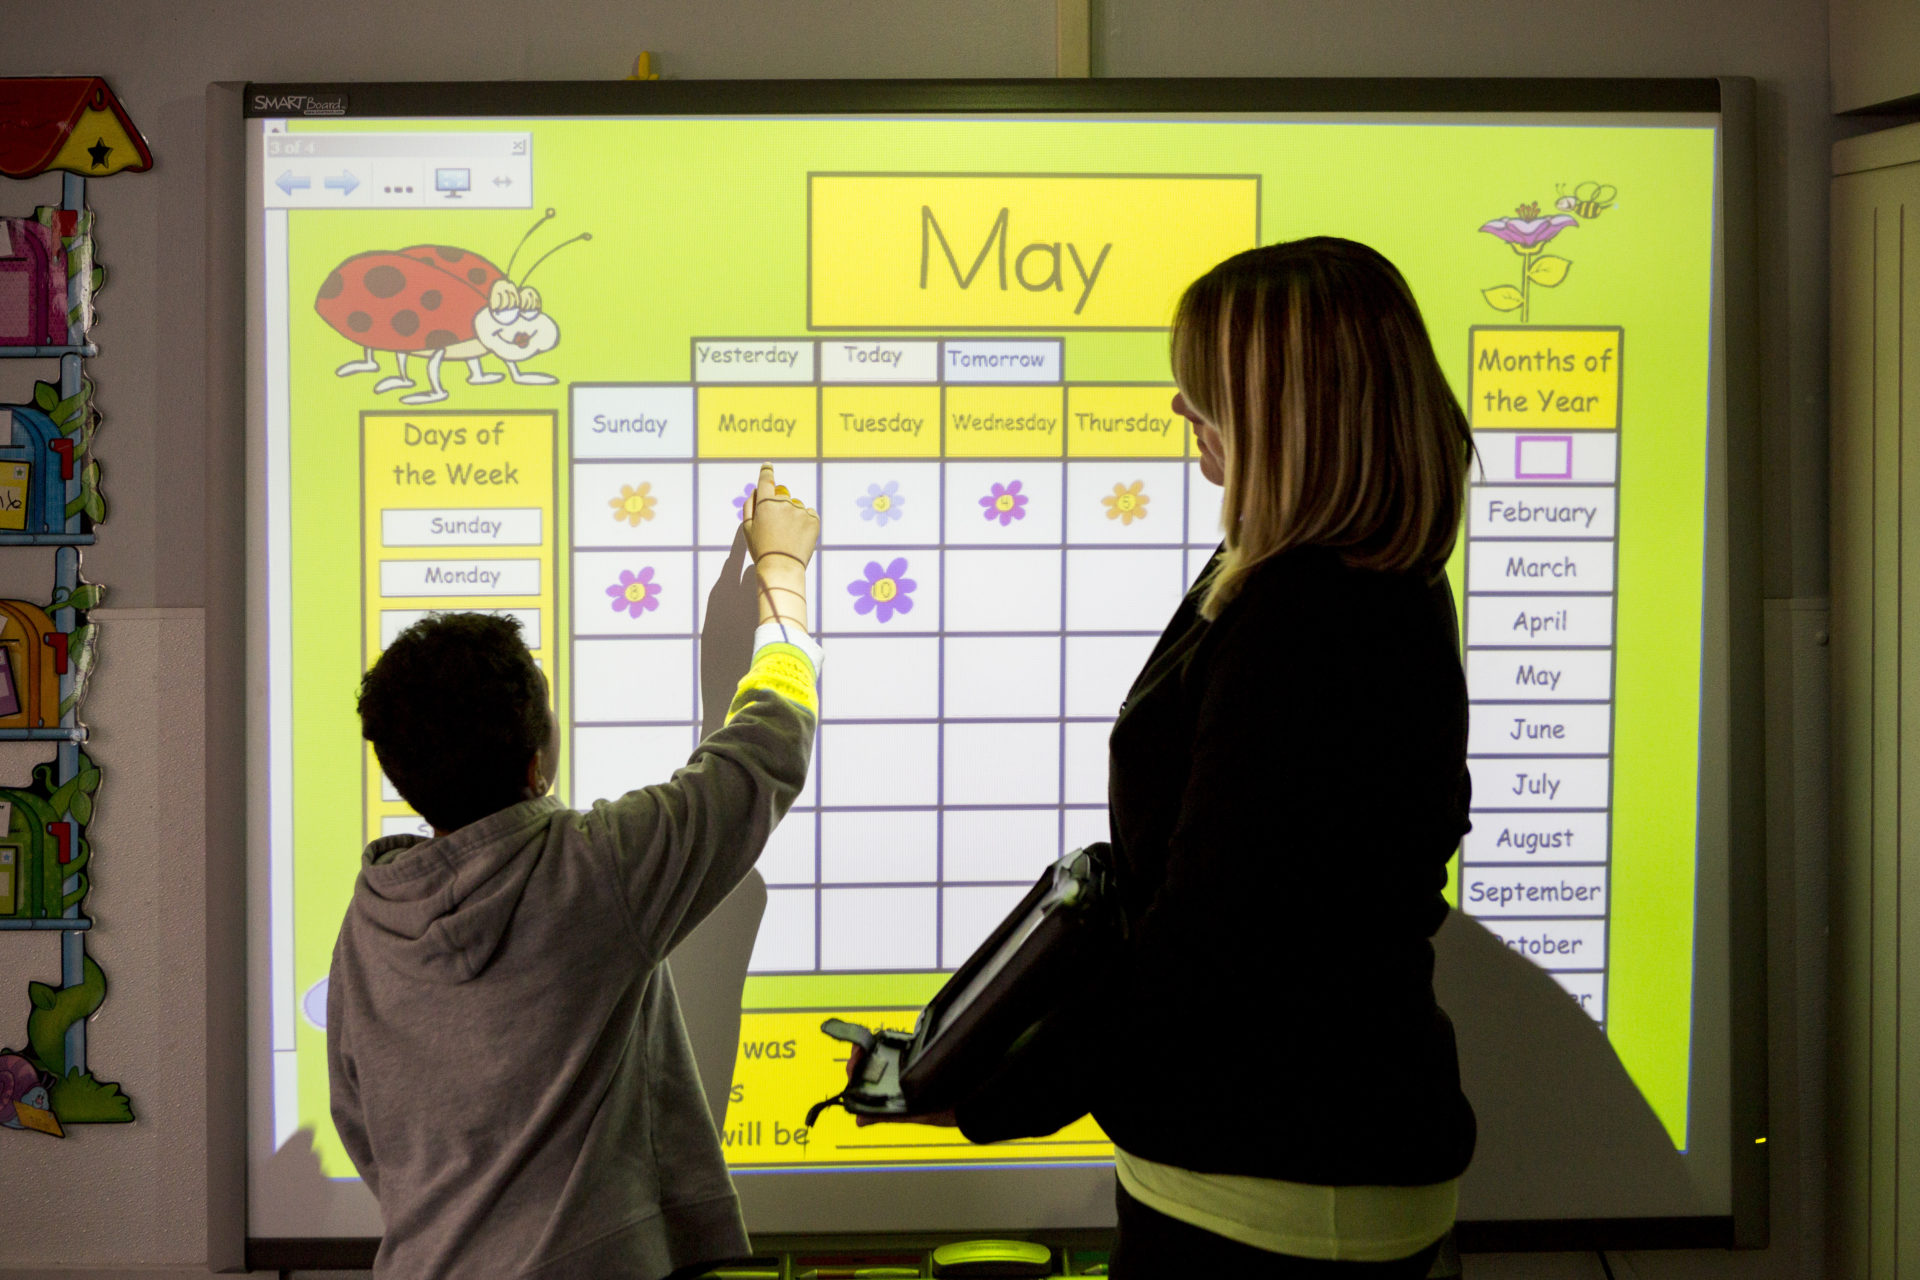 A young boy and his teacher stand in front of the smart board. They are point at a calendar for the month of May.